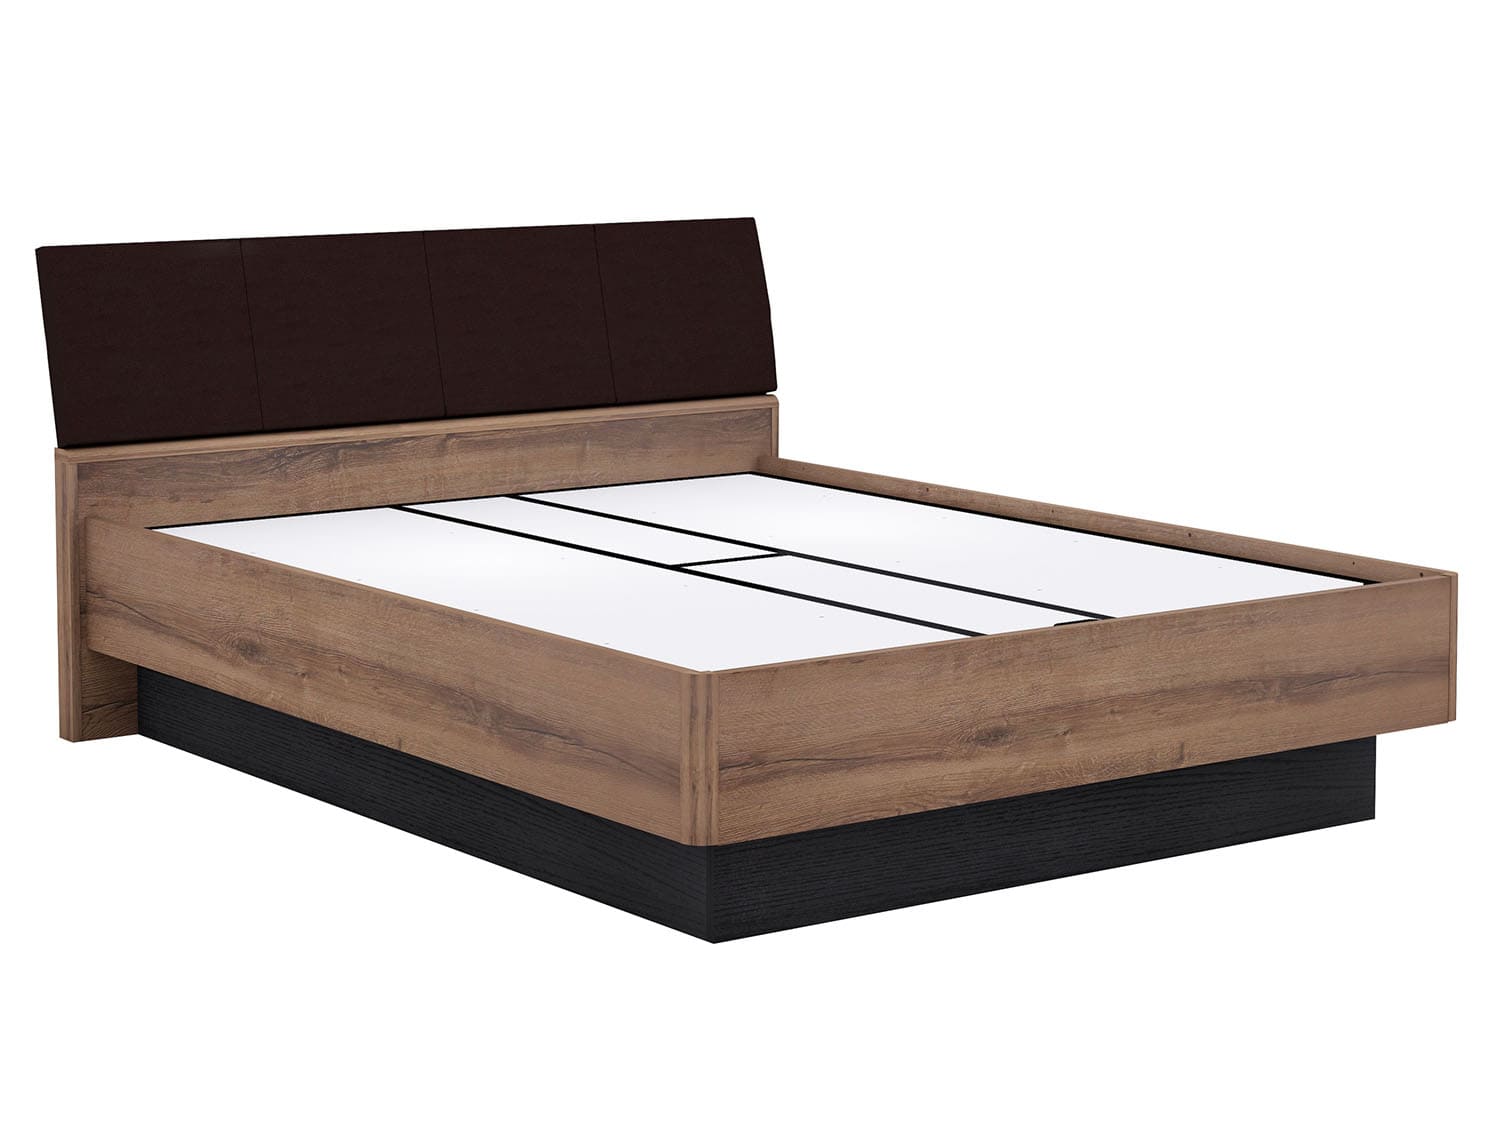 Full Lift On Storage King Size Bed, King Platform Bed With Drawers